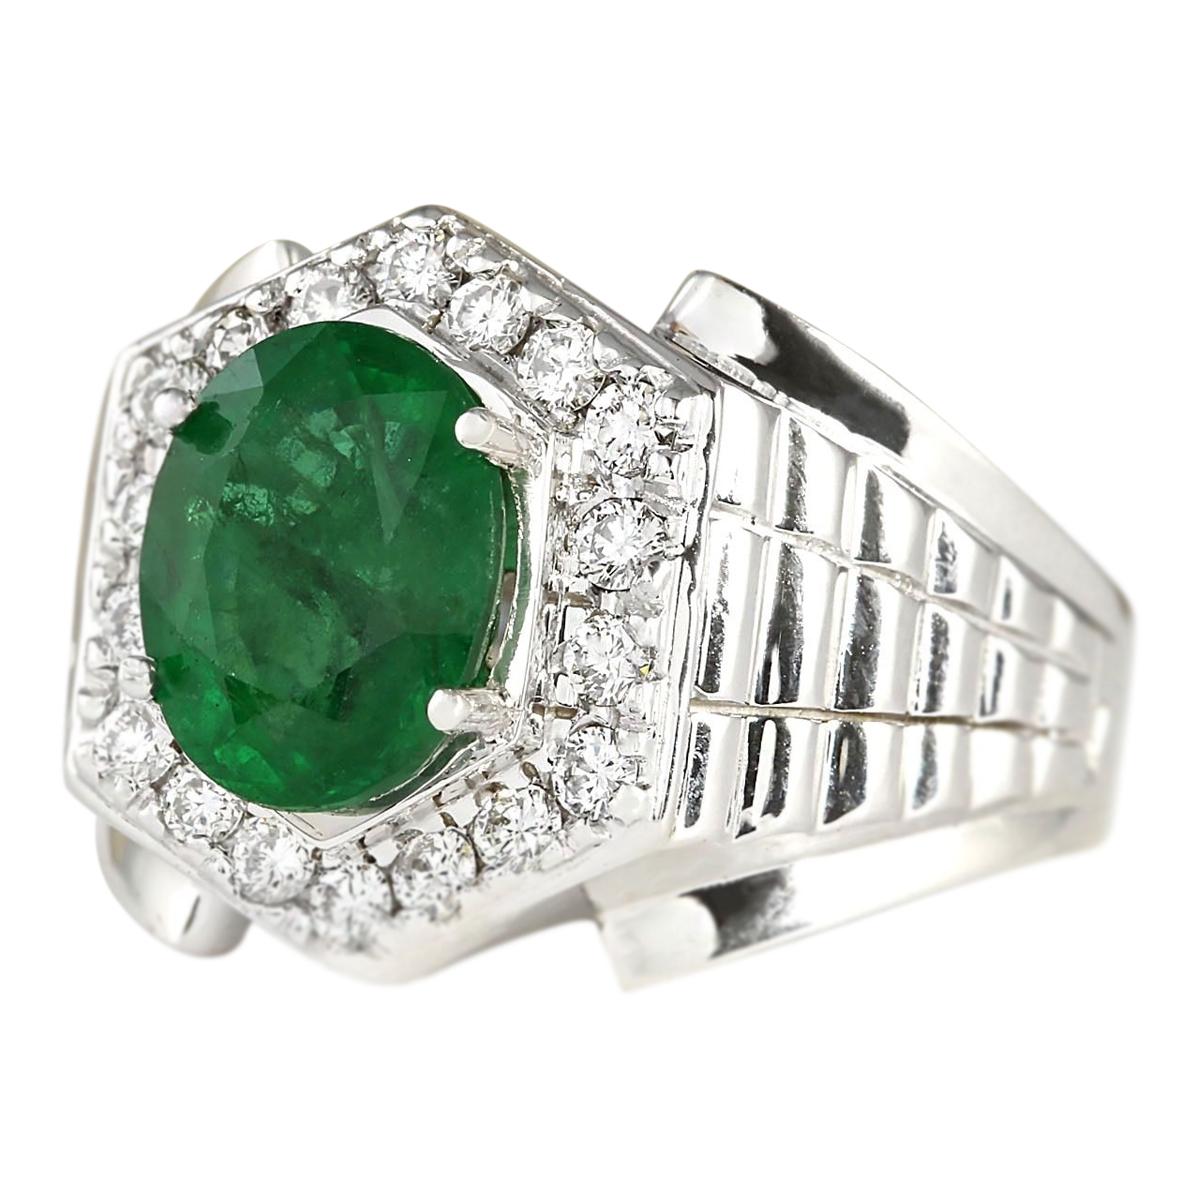 Presenting our sophisticated Men's Ring, featuring a captivating 4.63 Carat Natural Emerald set in 14 Karat White Gold. The emerald, measuring 11.00x9.00 mm, is complemented by 0.60 Carat of brilliant diamonds. With a total ring weight of 12.9 grams